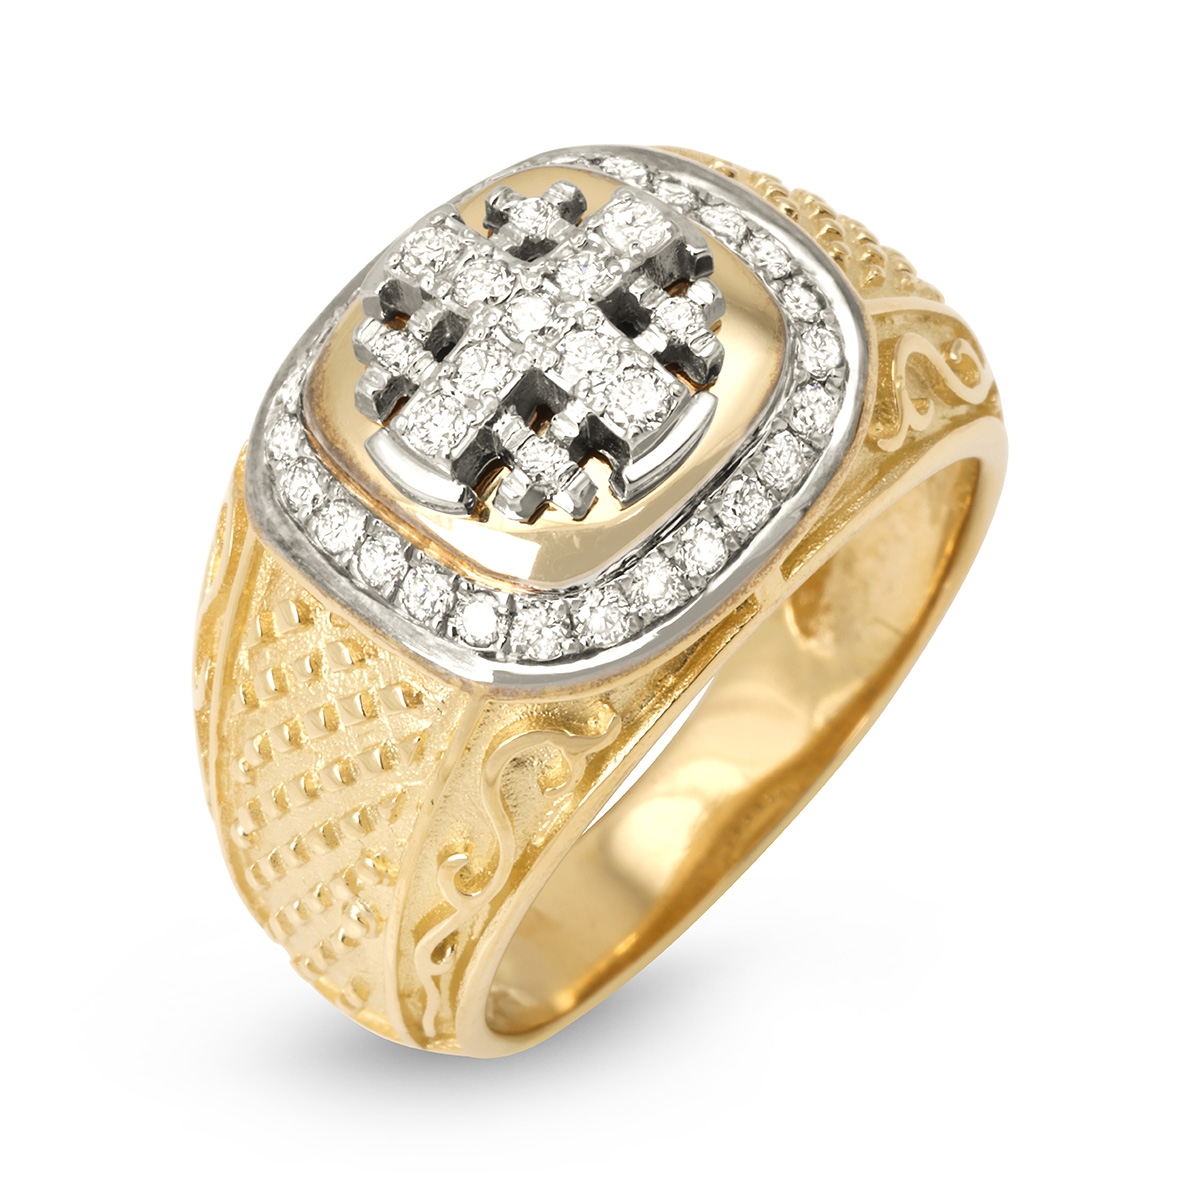 14K Two Toned Gold Jerusalem Cross Ring with Pave Diamonds and Lattice Detailing  - 1